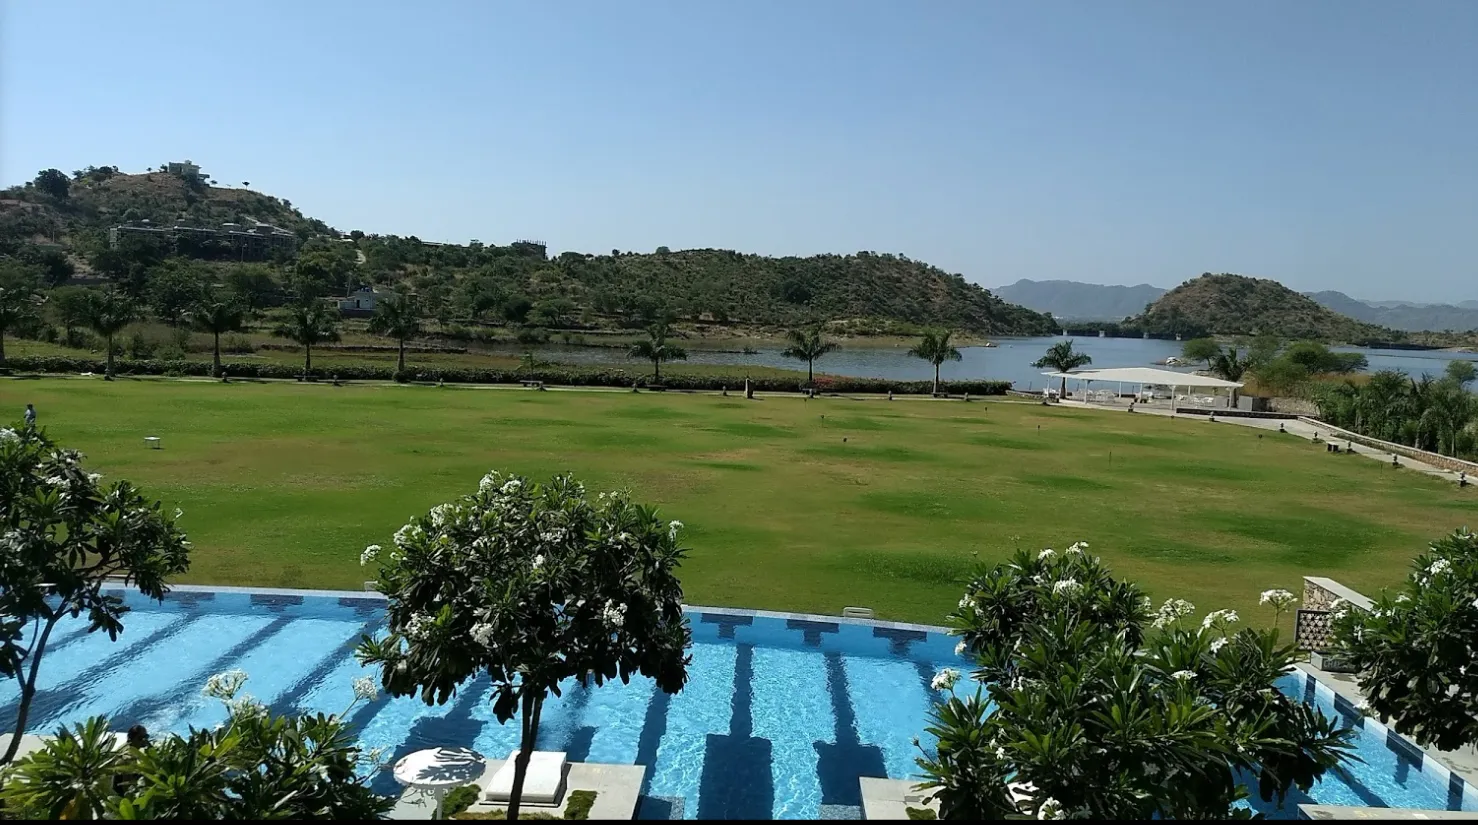 Pool Party in Udaipur